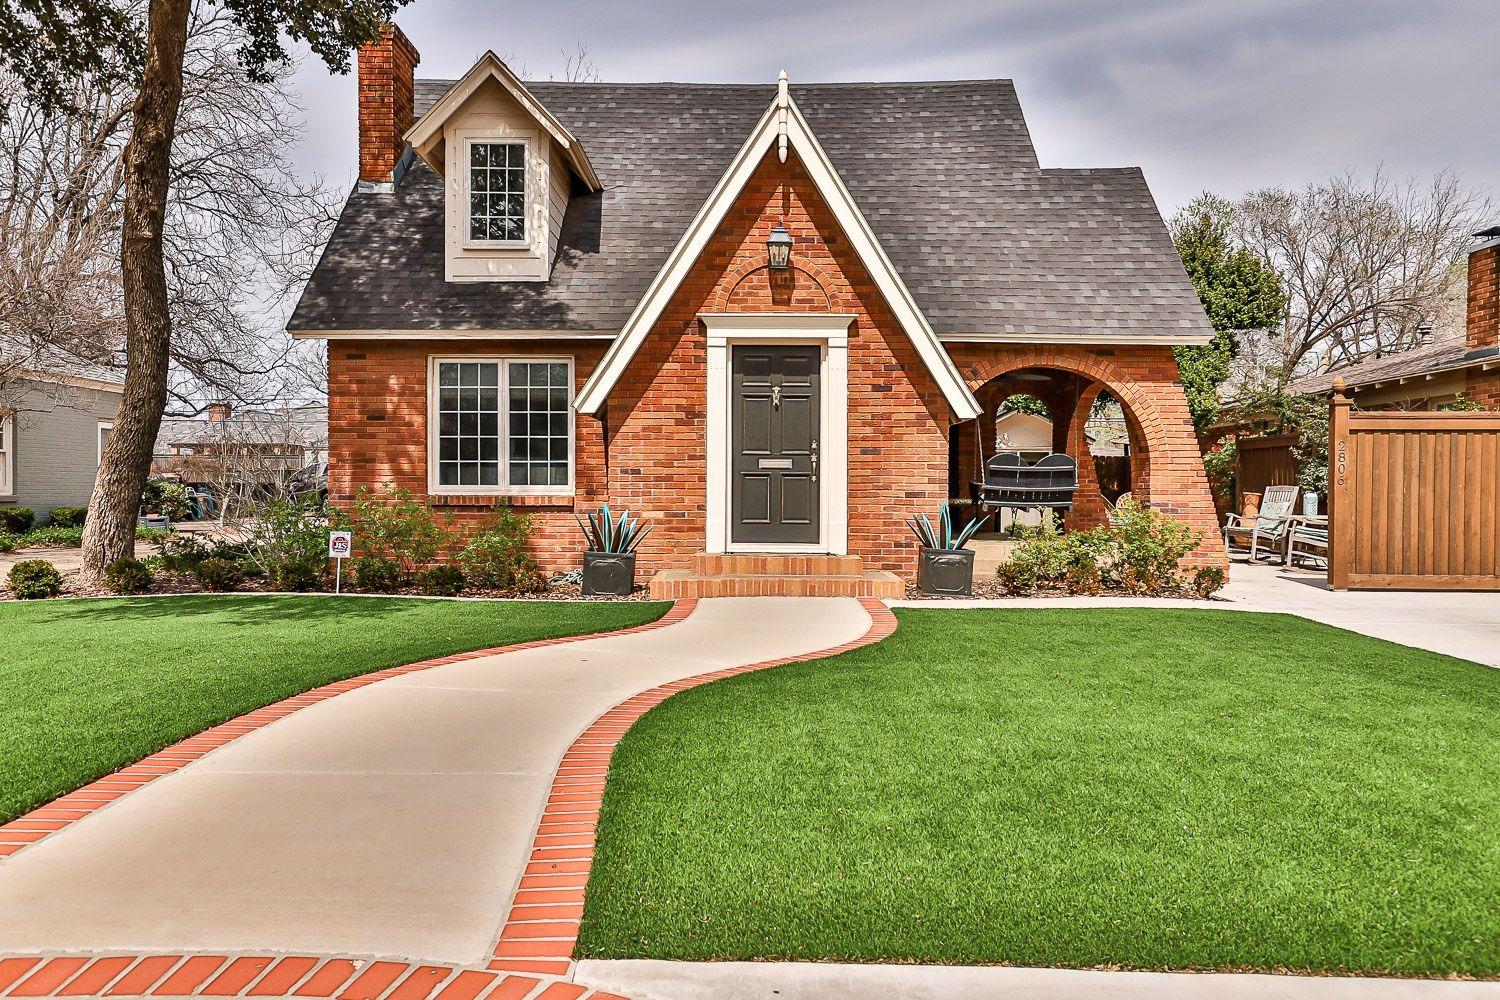 The Cutest Curb Appeal!